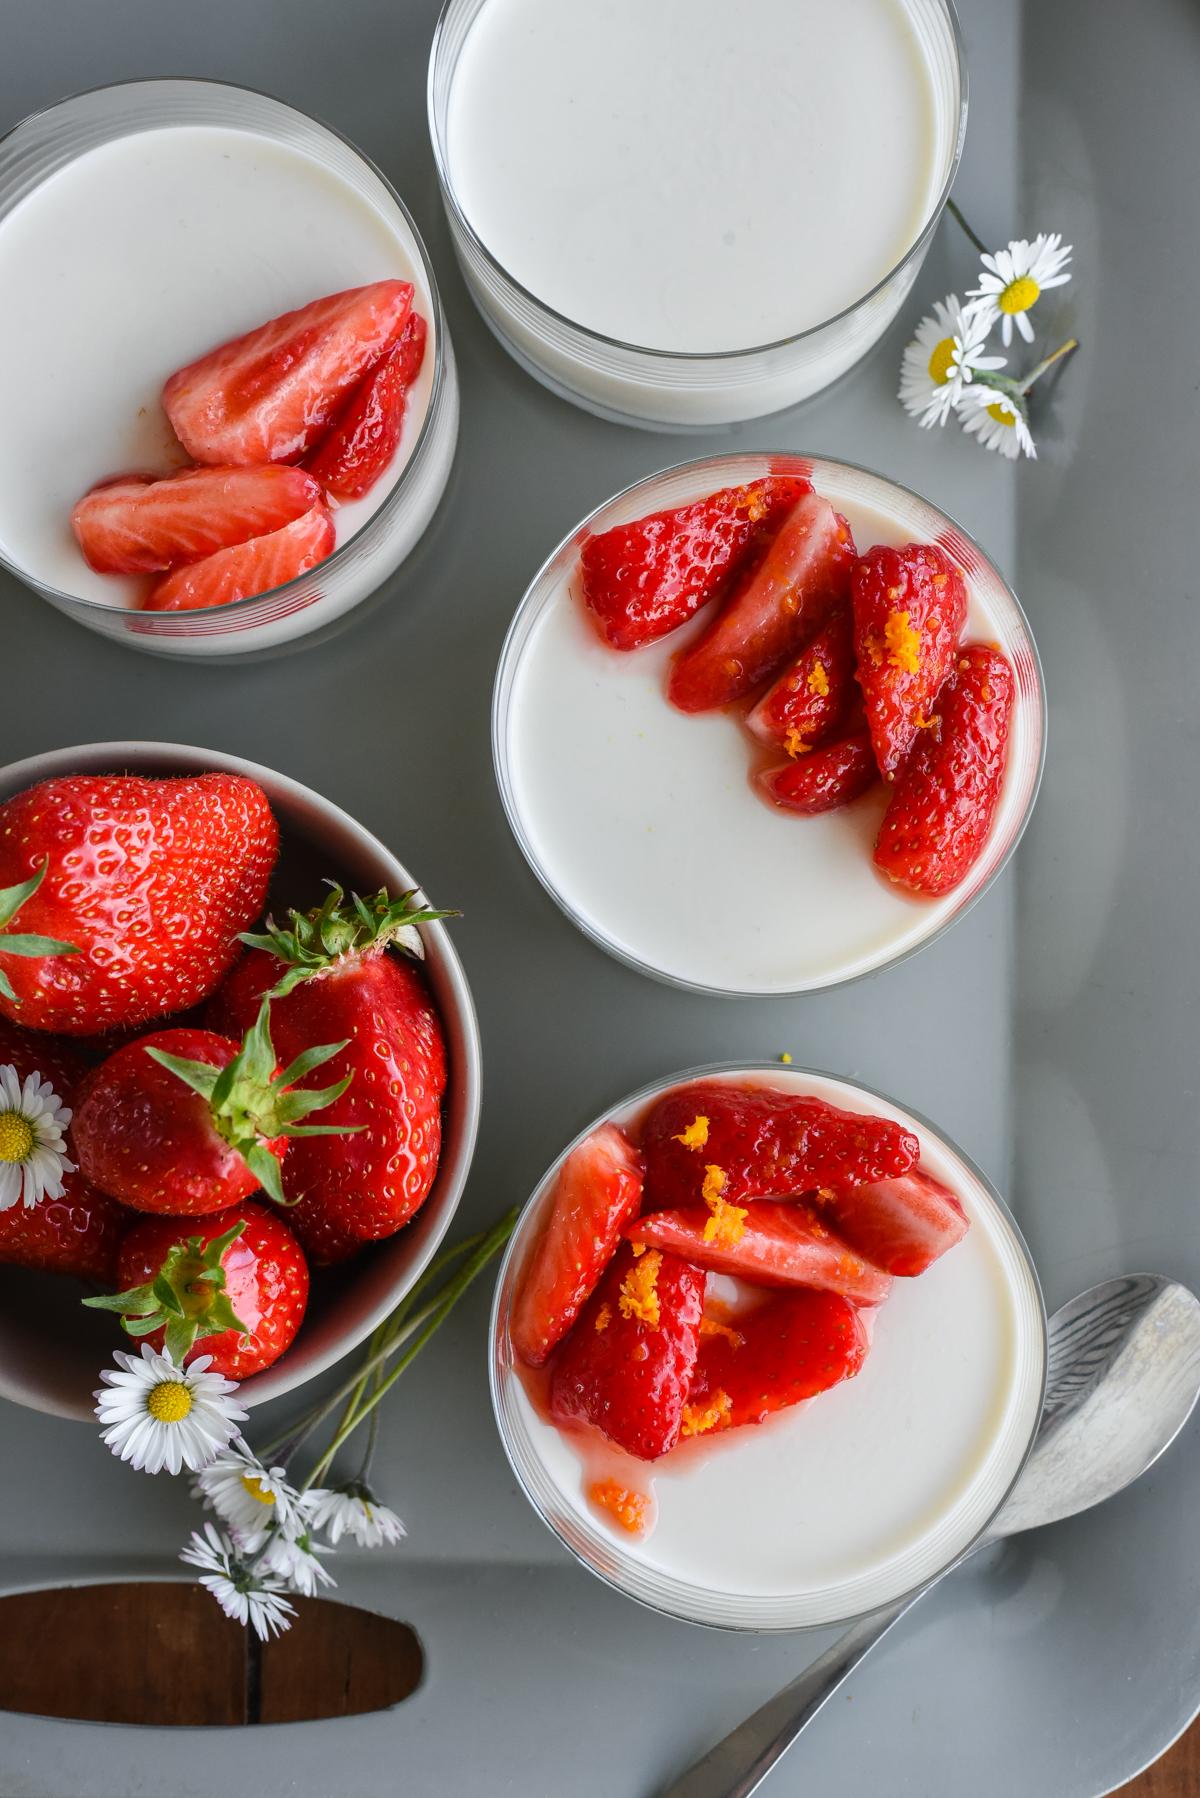 Mix strawberries with orange zest and sugar, then let sit for 2 hours. Add to the glasses before serving. (Audrey Le Goff)